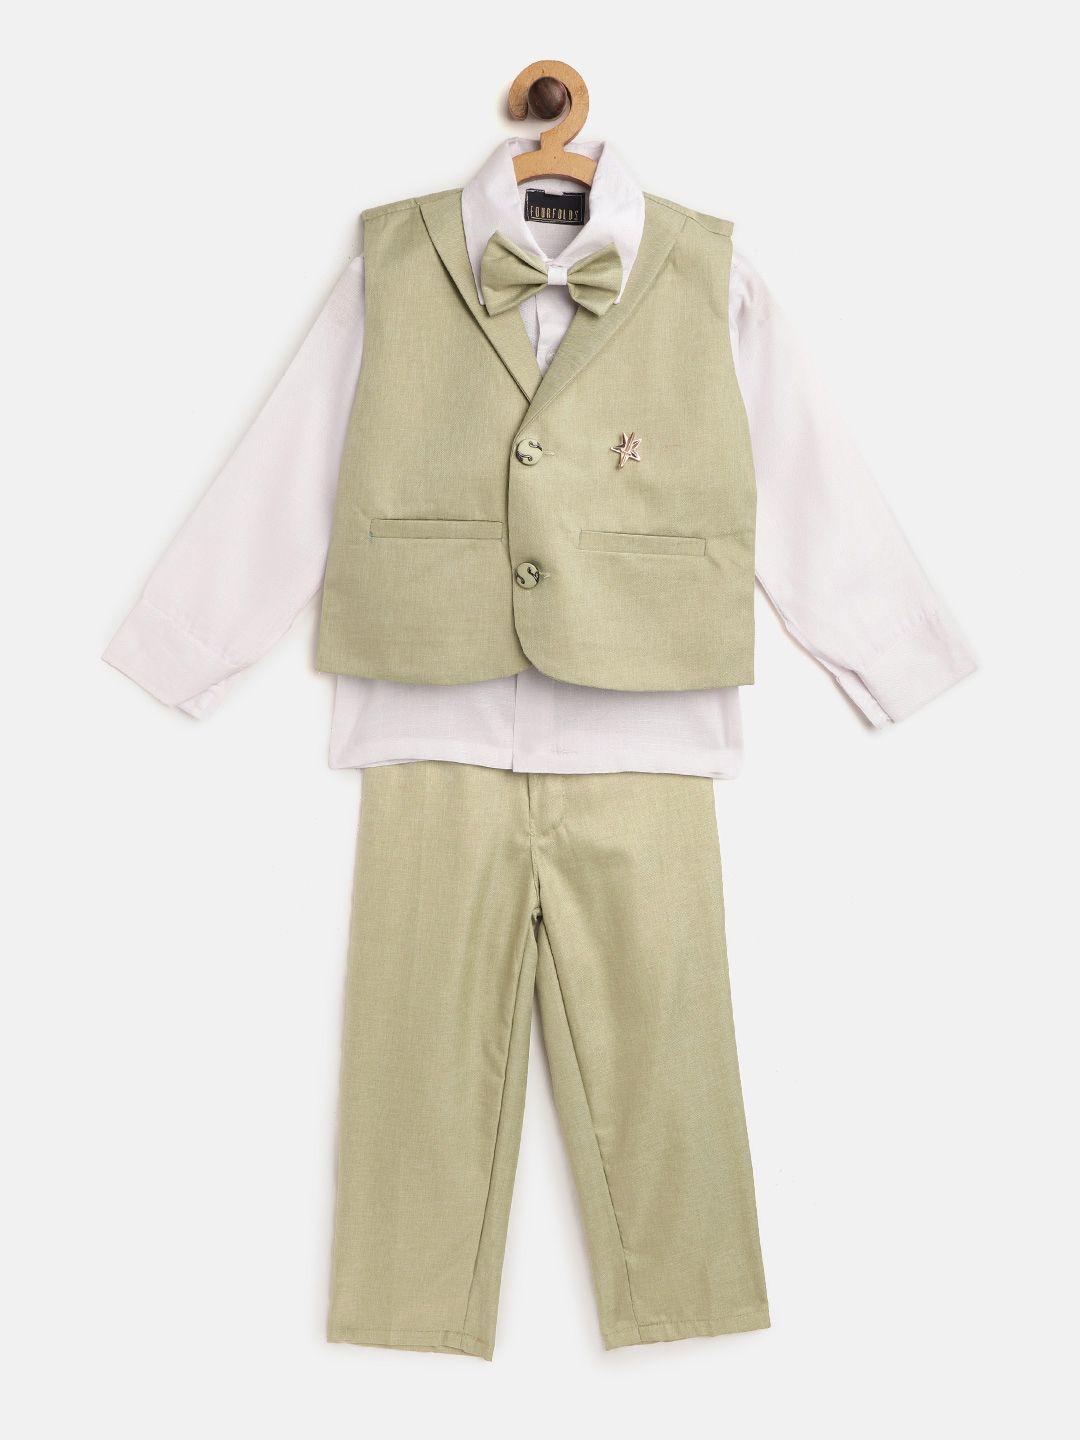 FOURFOLDS Boys White & Green Solid Clothing Set with Bow Tie